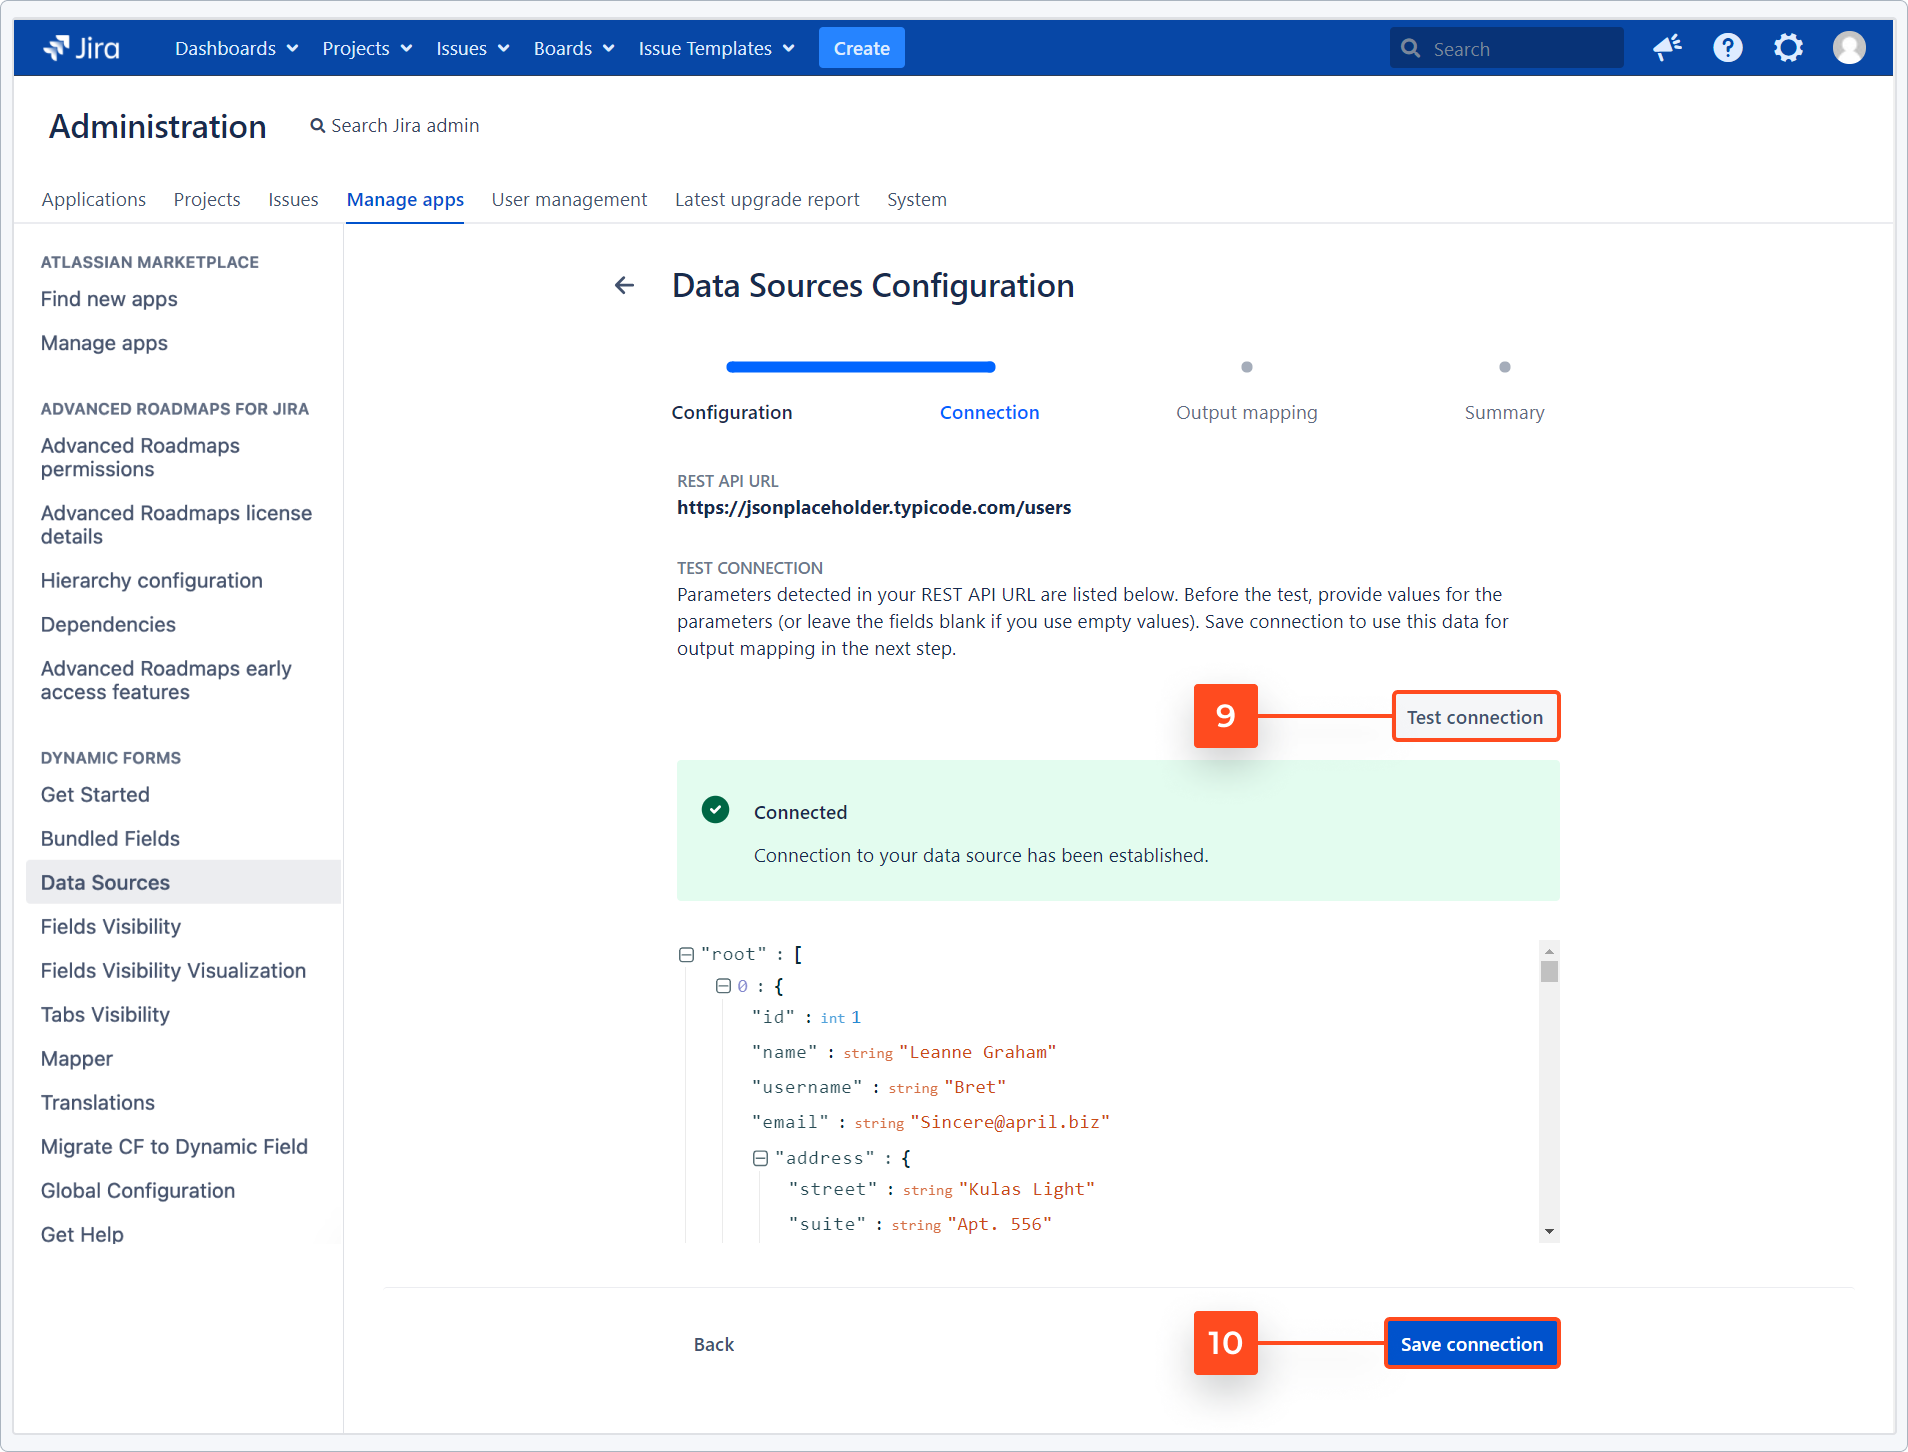 Dynamic Forms for Jira - Bundled Fields Data Sources: Test connection with no additional parameters